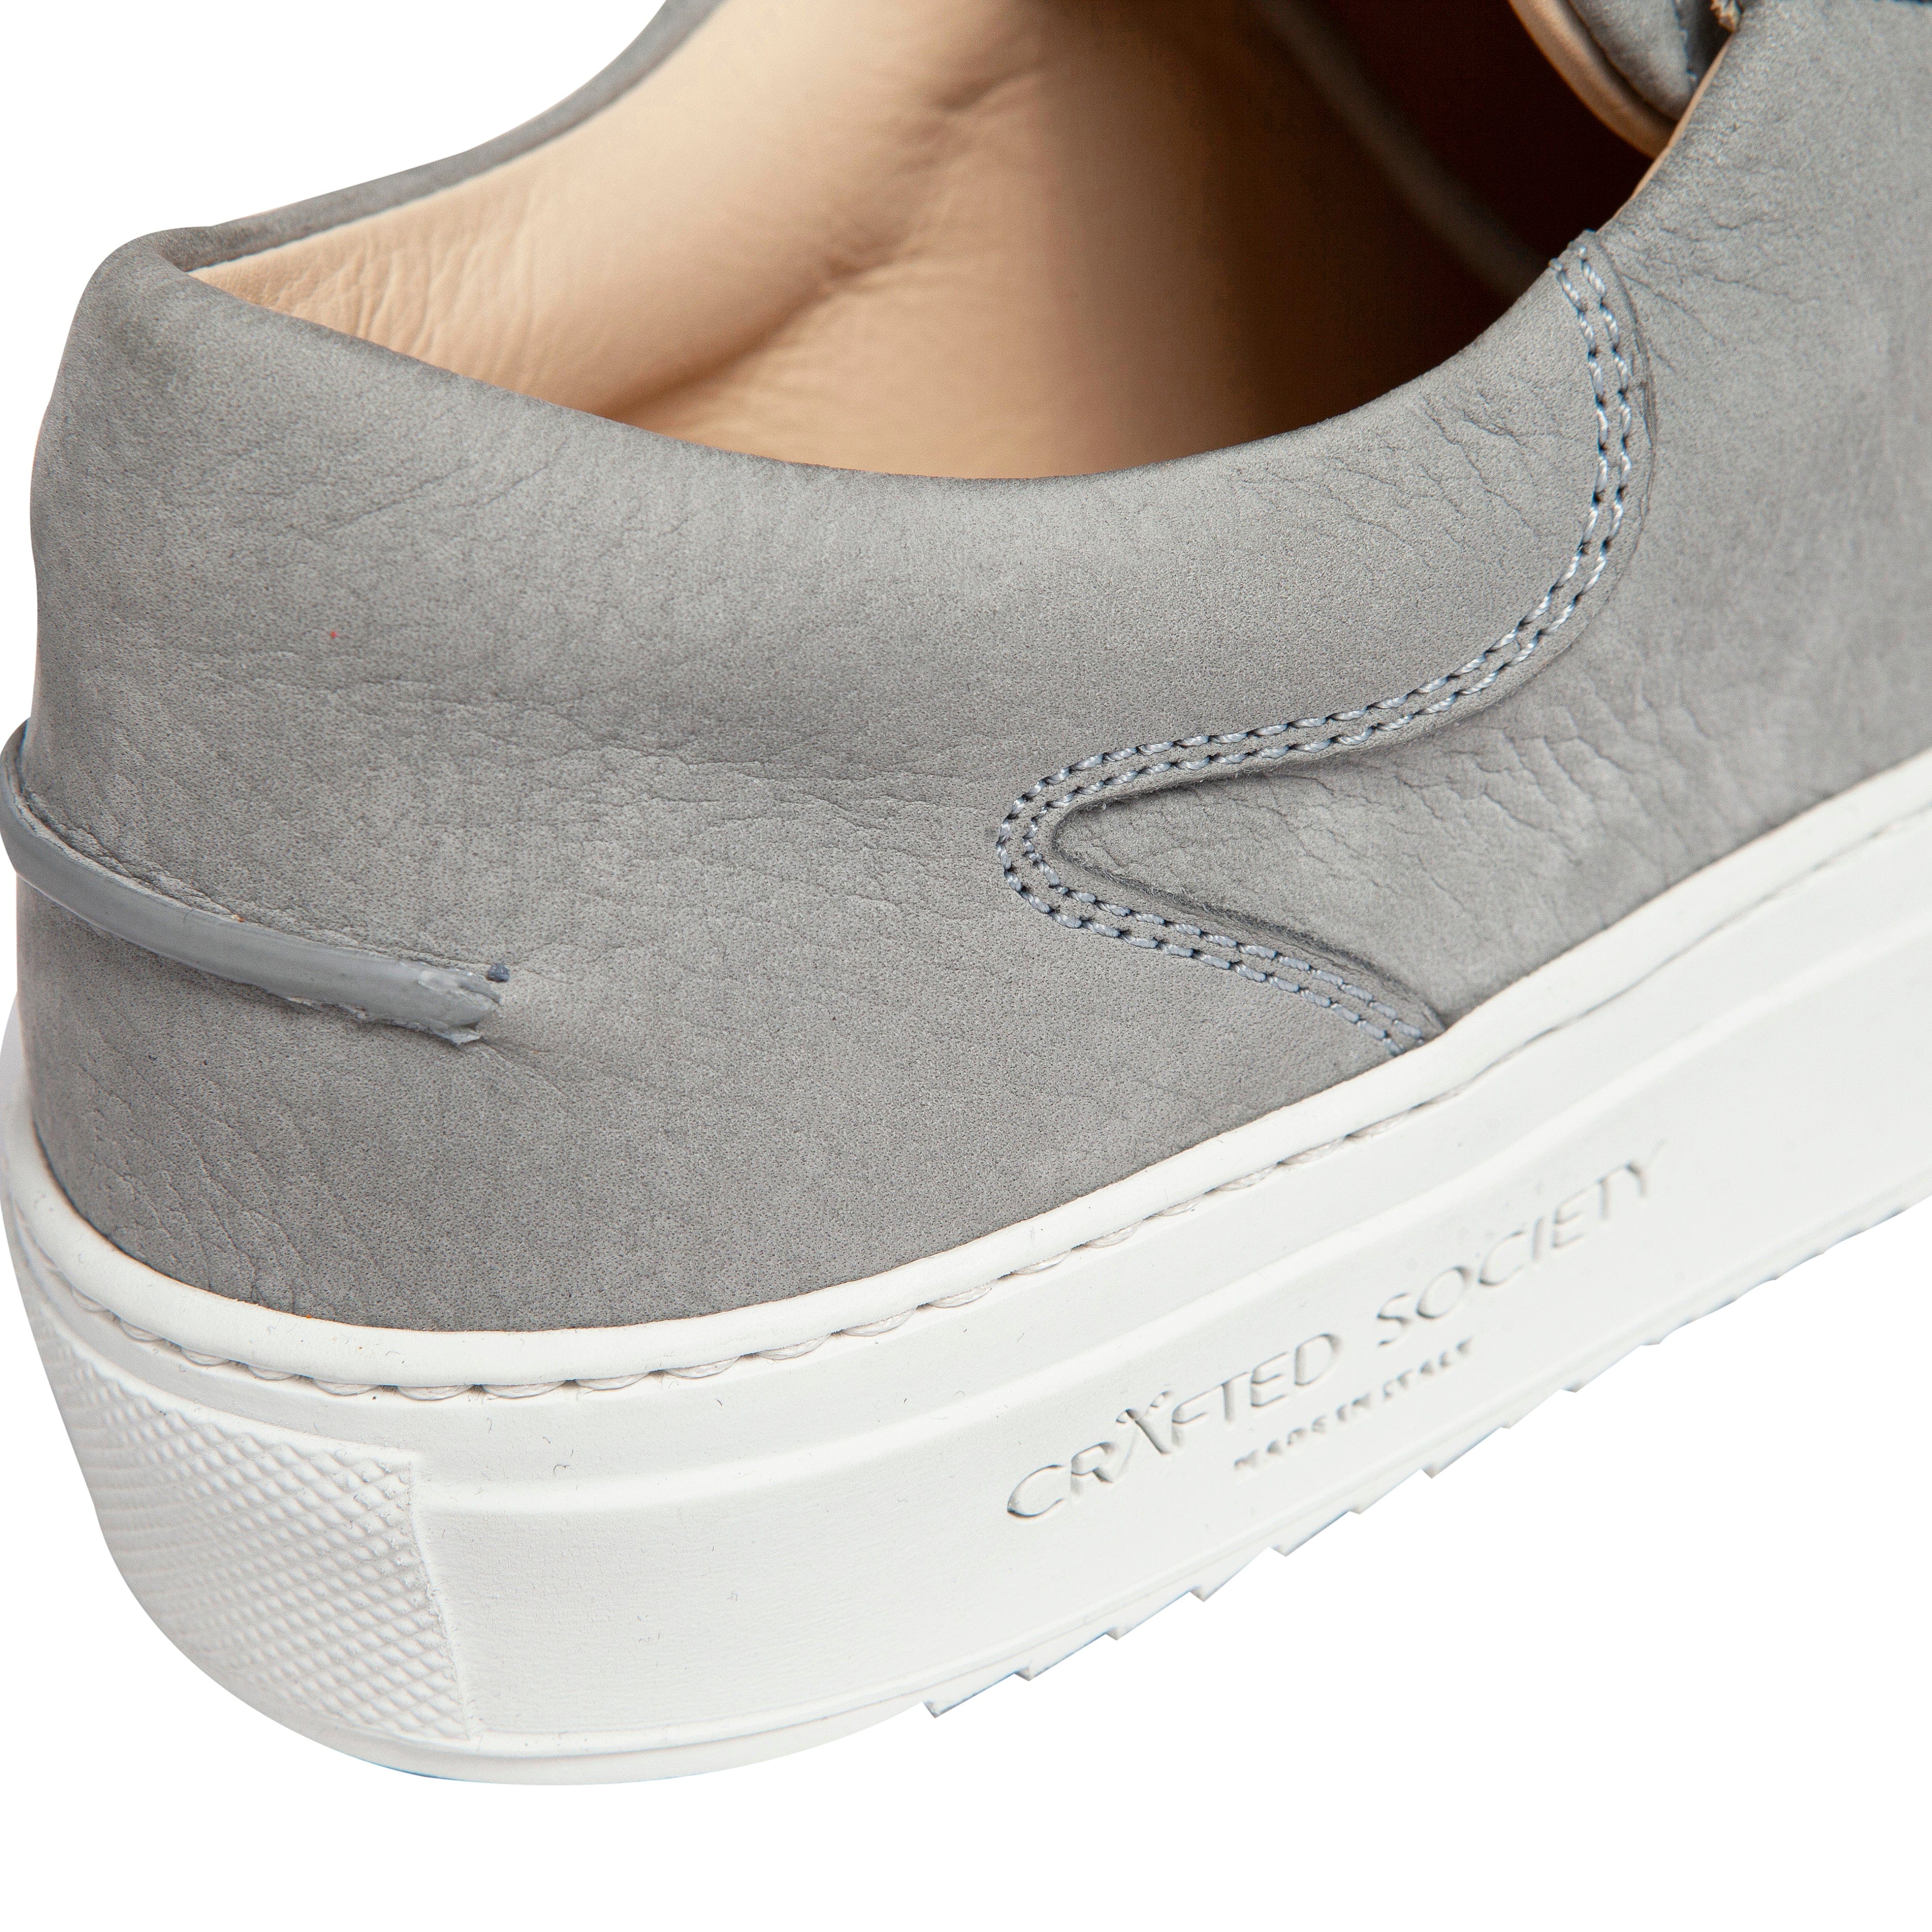 Mario Low Refined Sneaker | Light Grey Nubuck | White Outsole | Made in Italy | Sizes 39, 40, 41 & 42